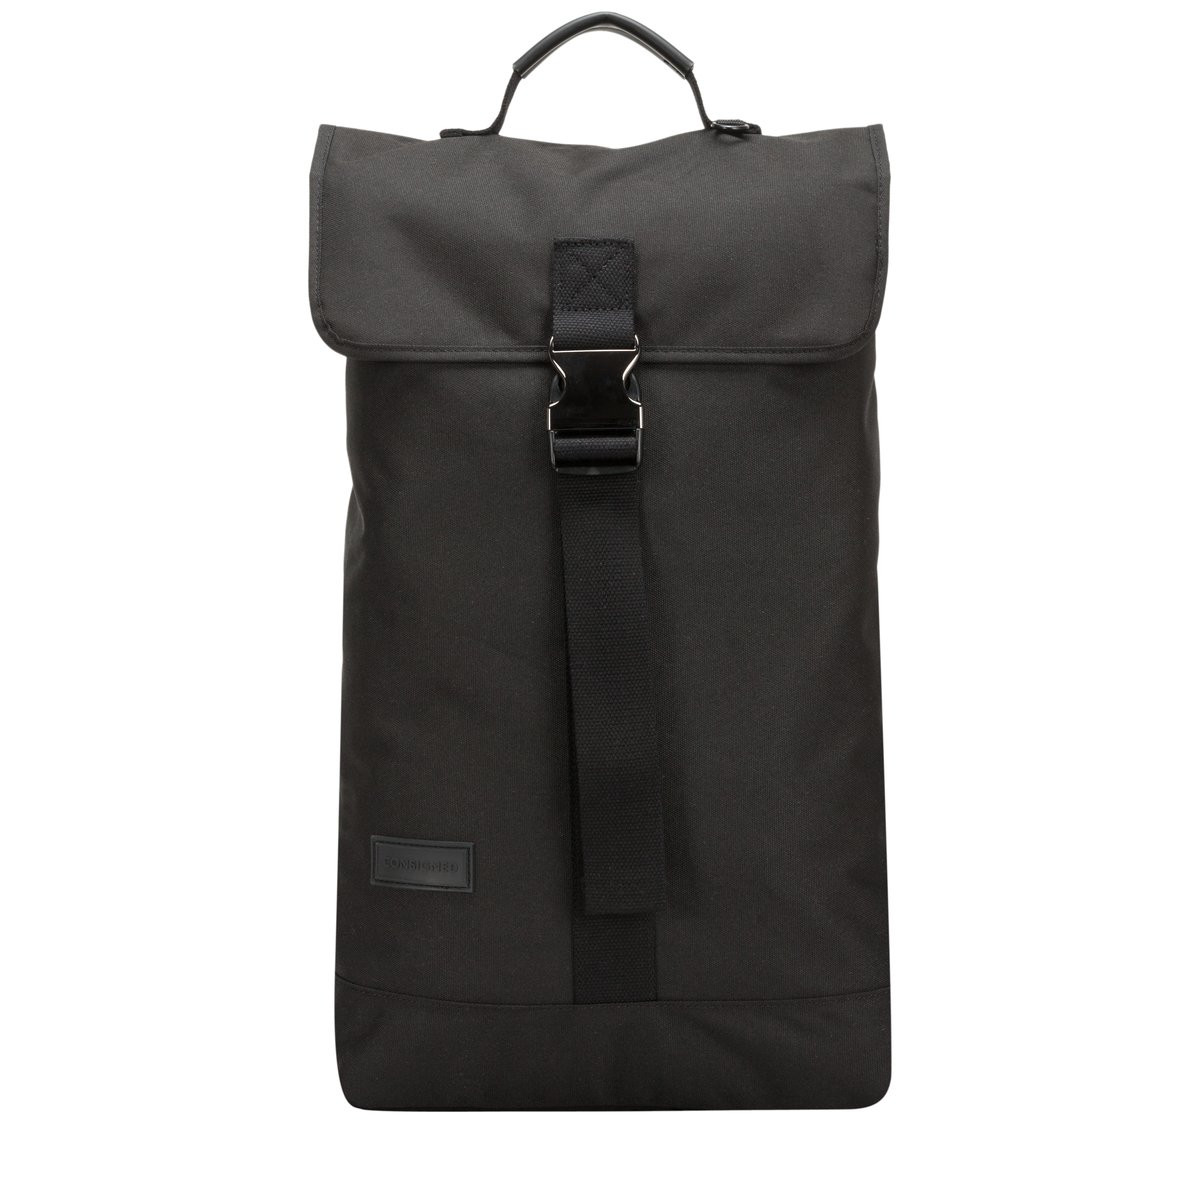 CONSIGNED - Vance Backpack